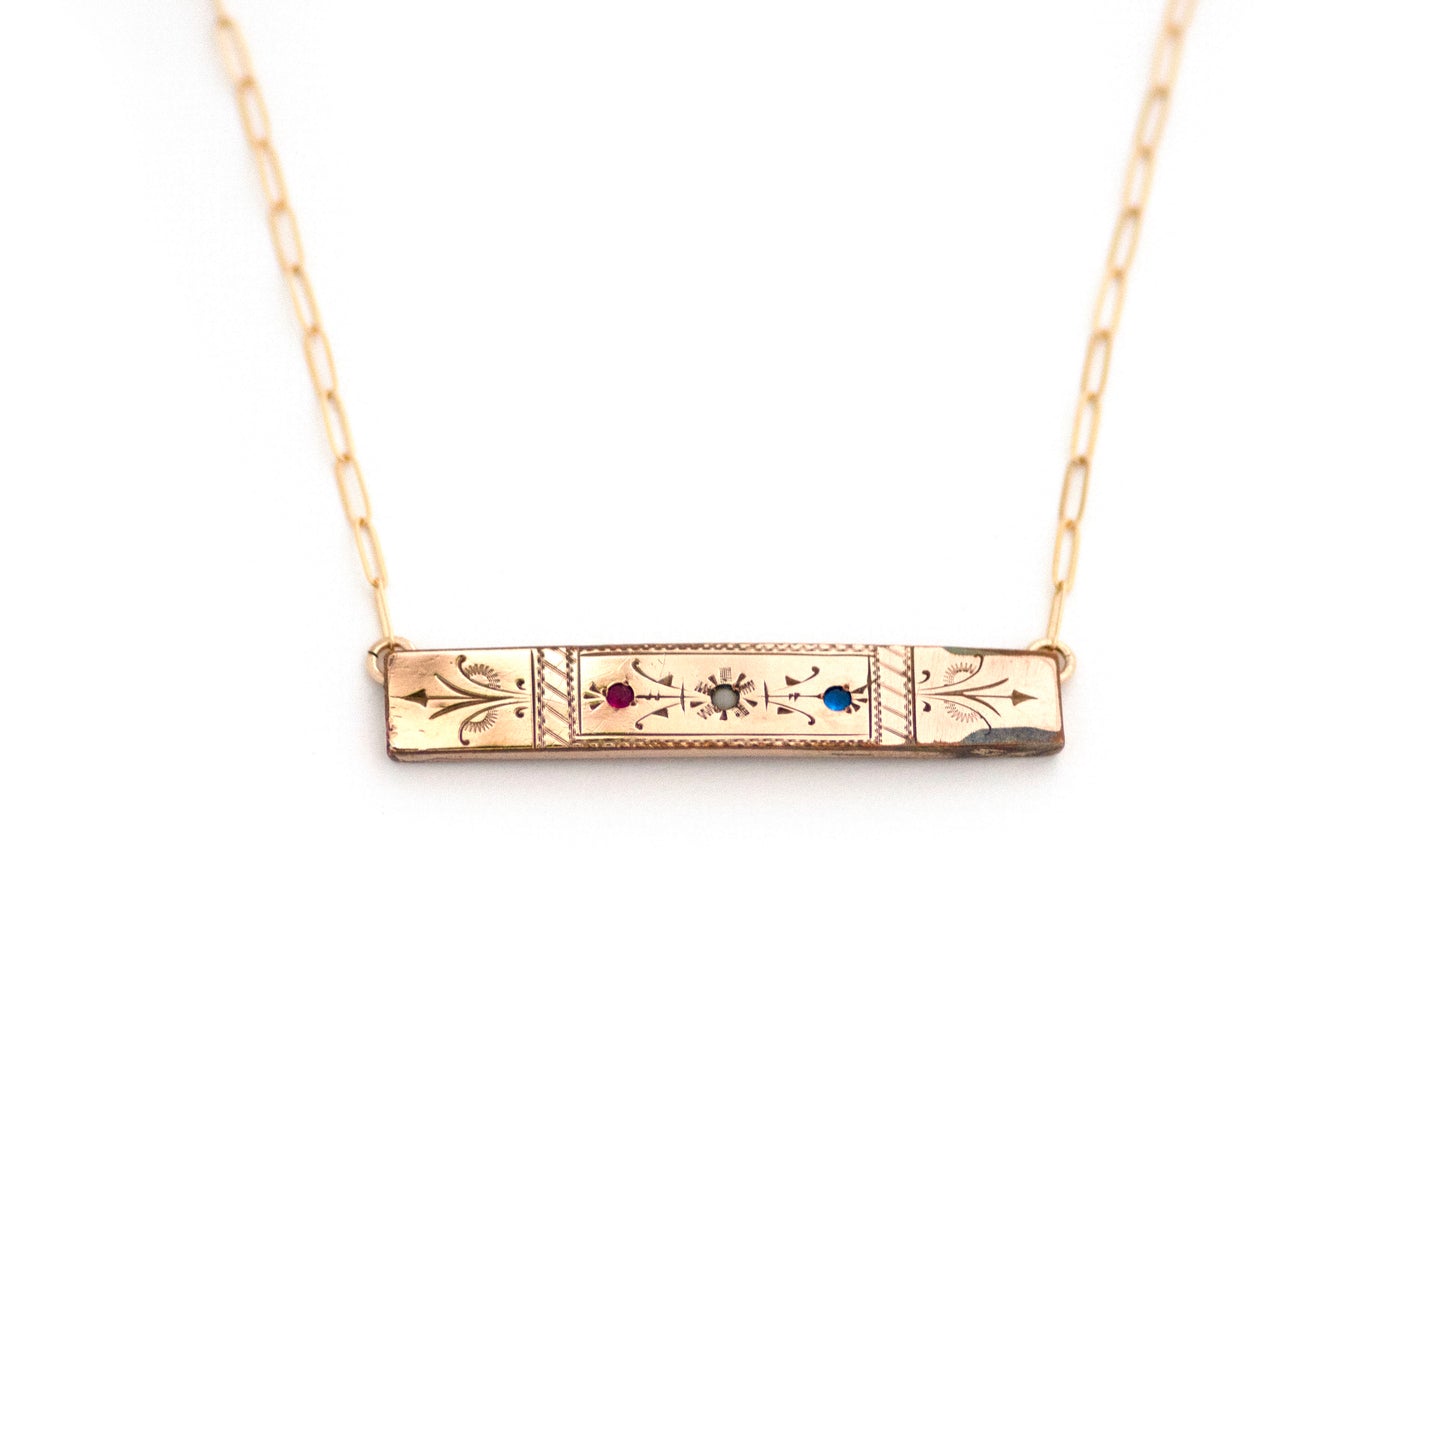 This one-of-a-kind conversion necklace is made up of:  Gold filled Victorian bar pin pendant from the late 1800s with hand tooled details and red, white and blue glass accents.